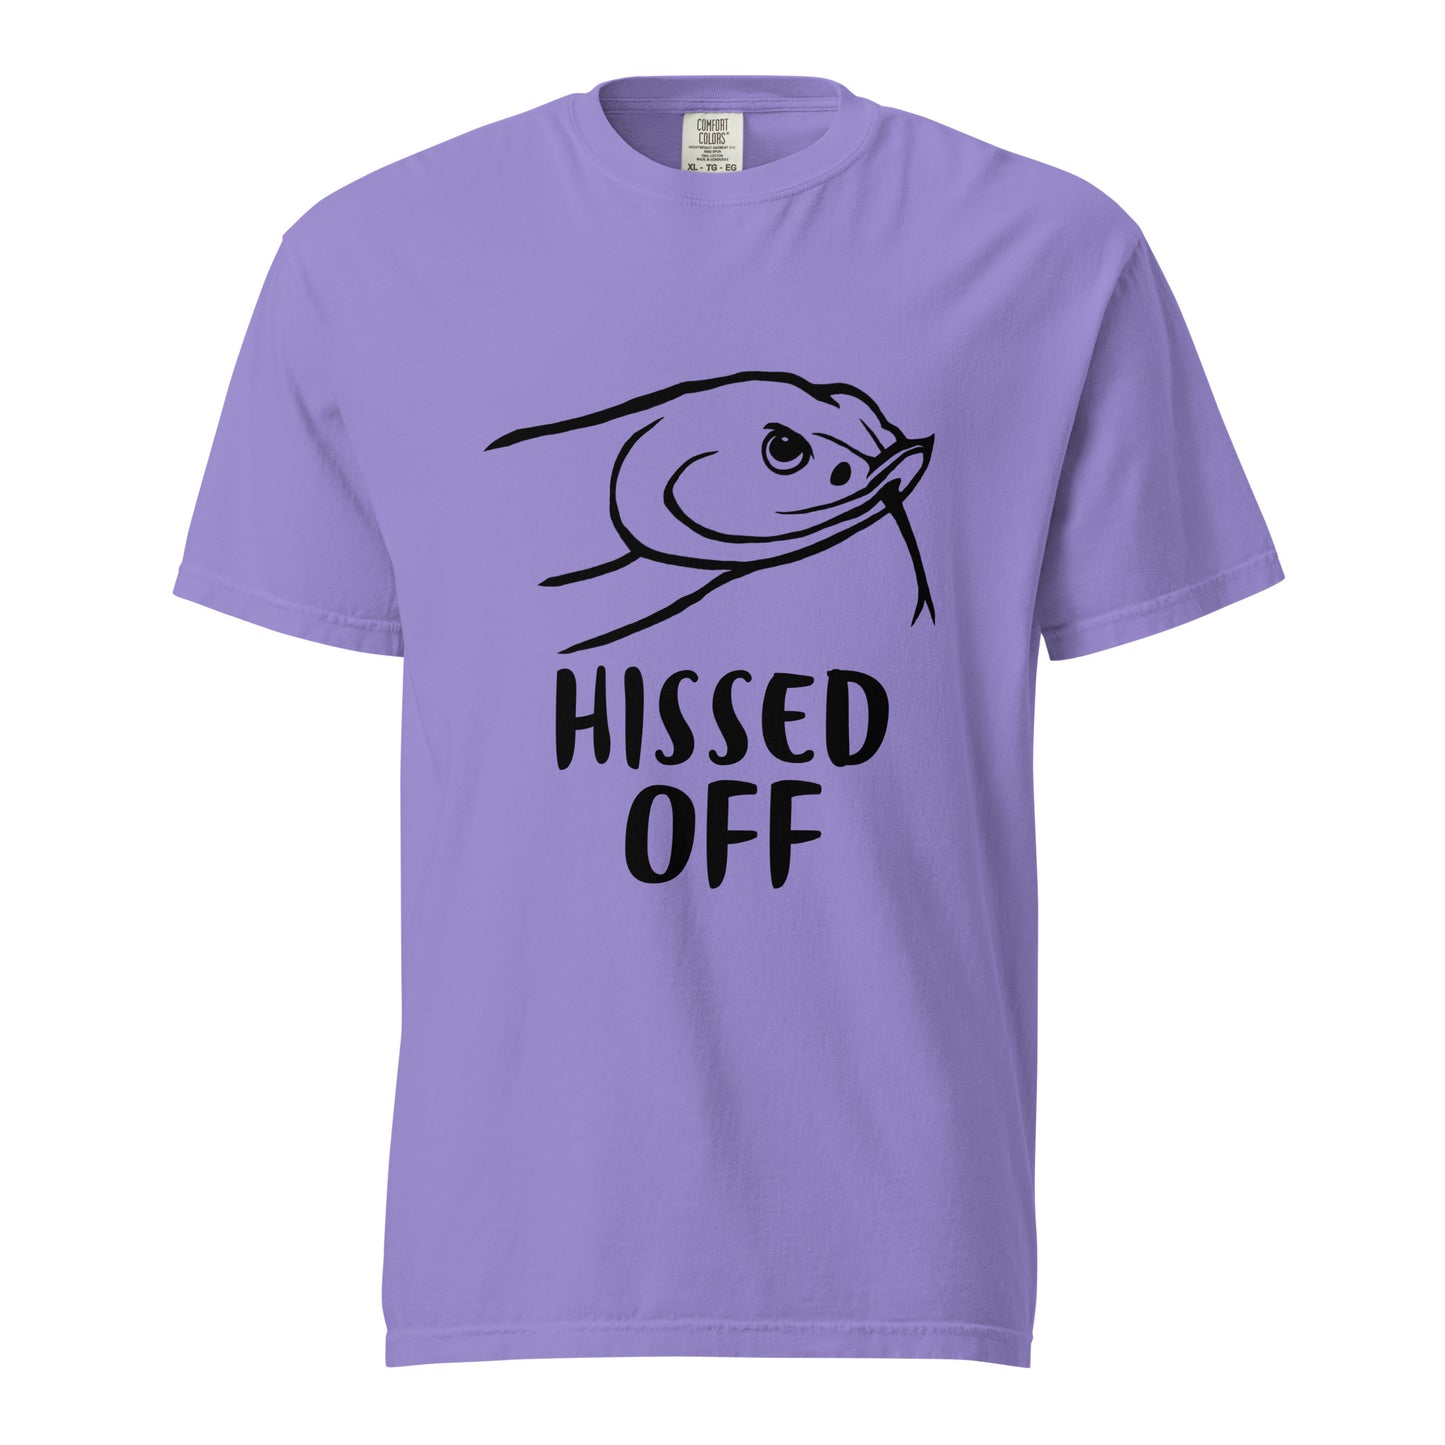 Hissed Off T-Shirt